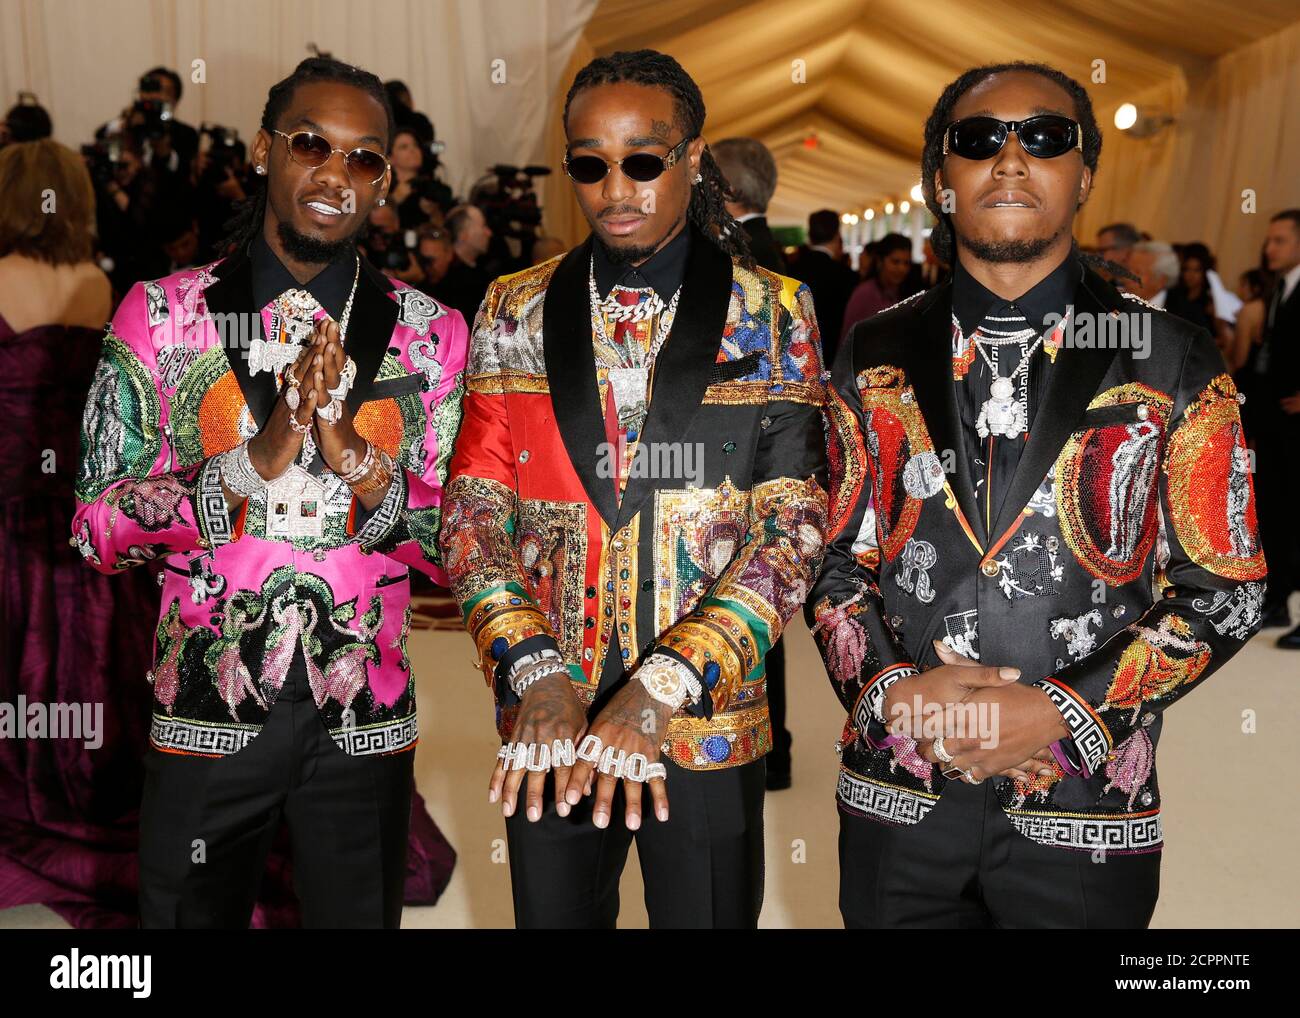 L-R) Takeoff, Quavo and Offset of Migos arrive at the Metropolitan Museum  of Art Costume Institute Gala (Met Gala) to celebrate the opening of  “Heavenly Bodies: Fashion and the Catholic Imagination” in